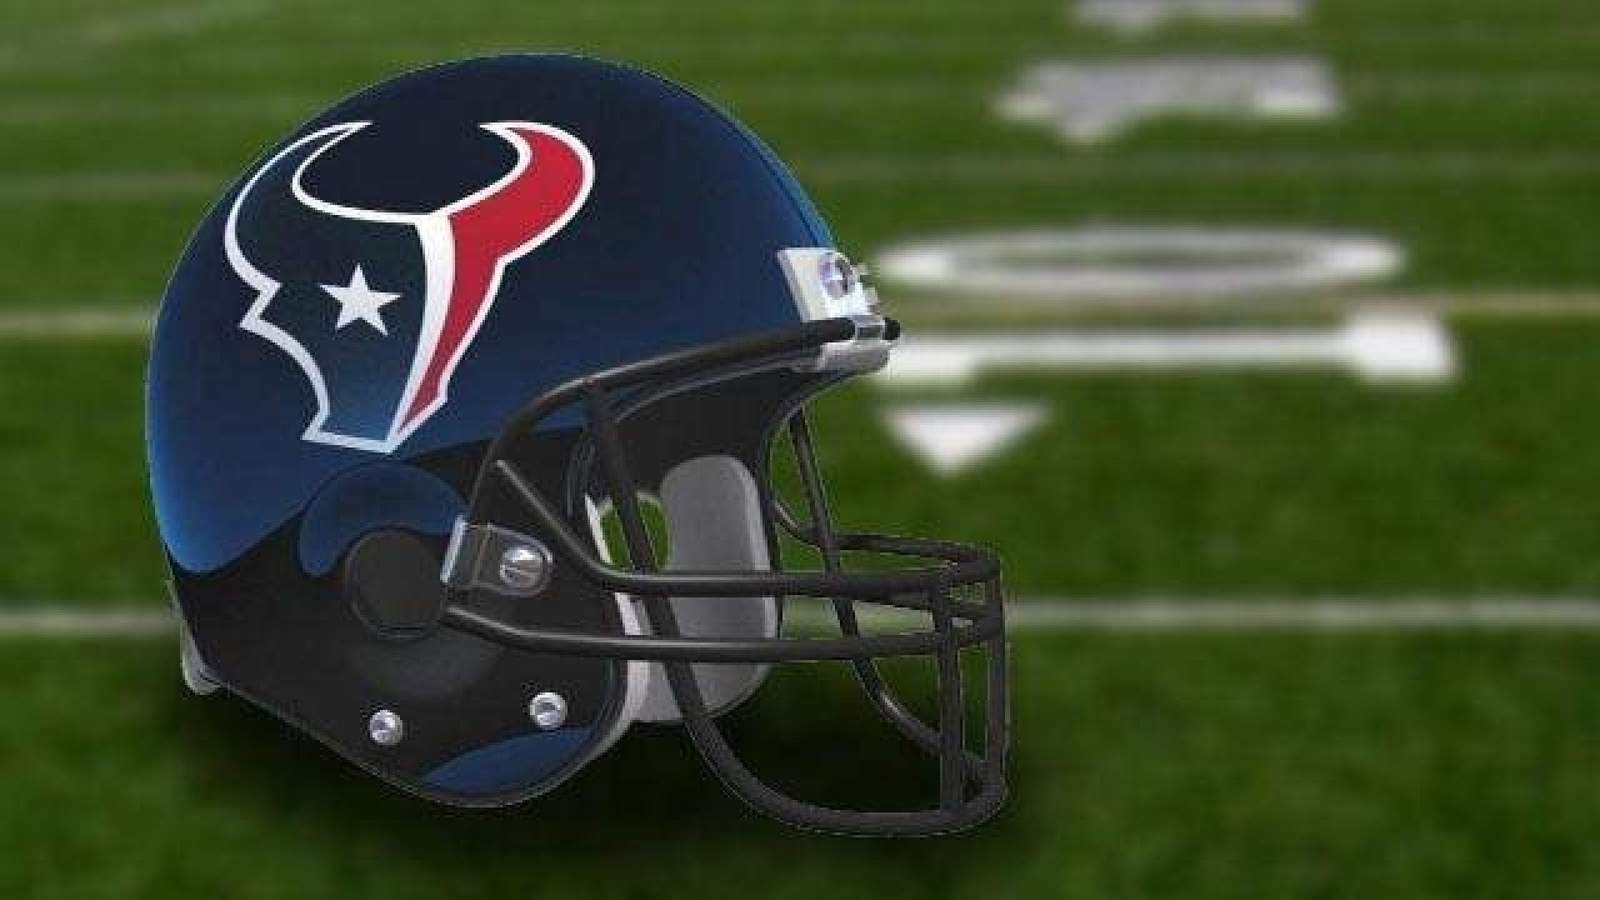 3 things to watch Sunday in the Texans vs. Jags game